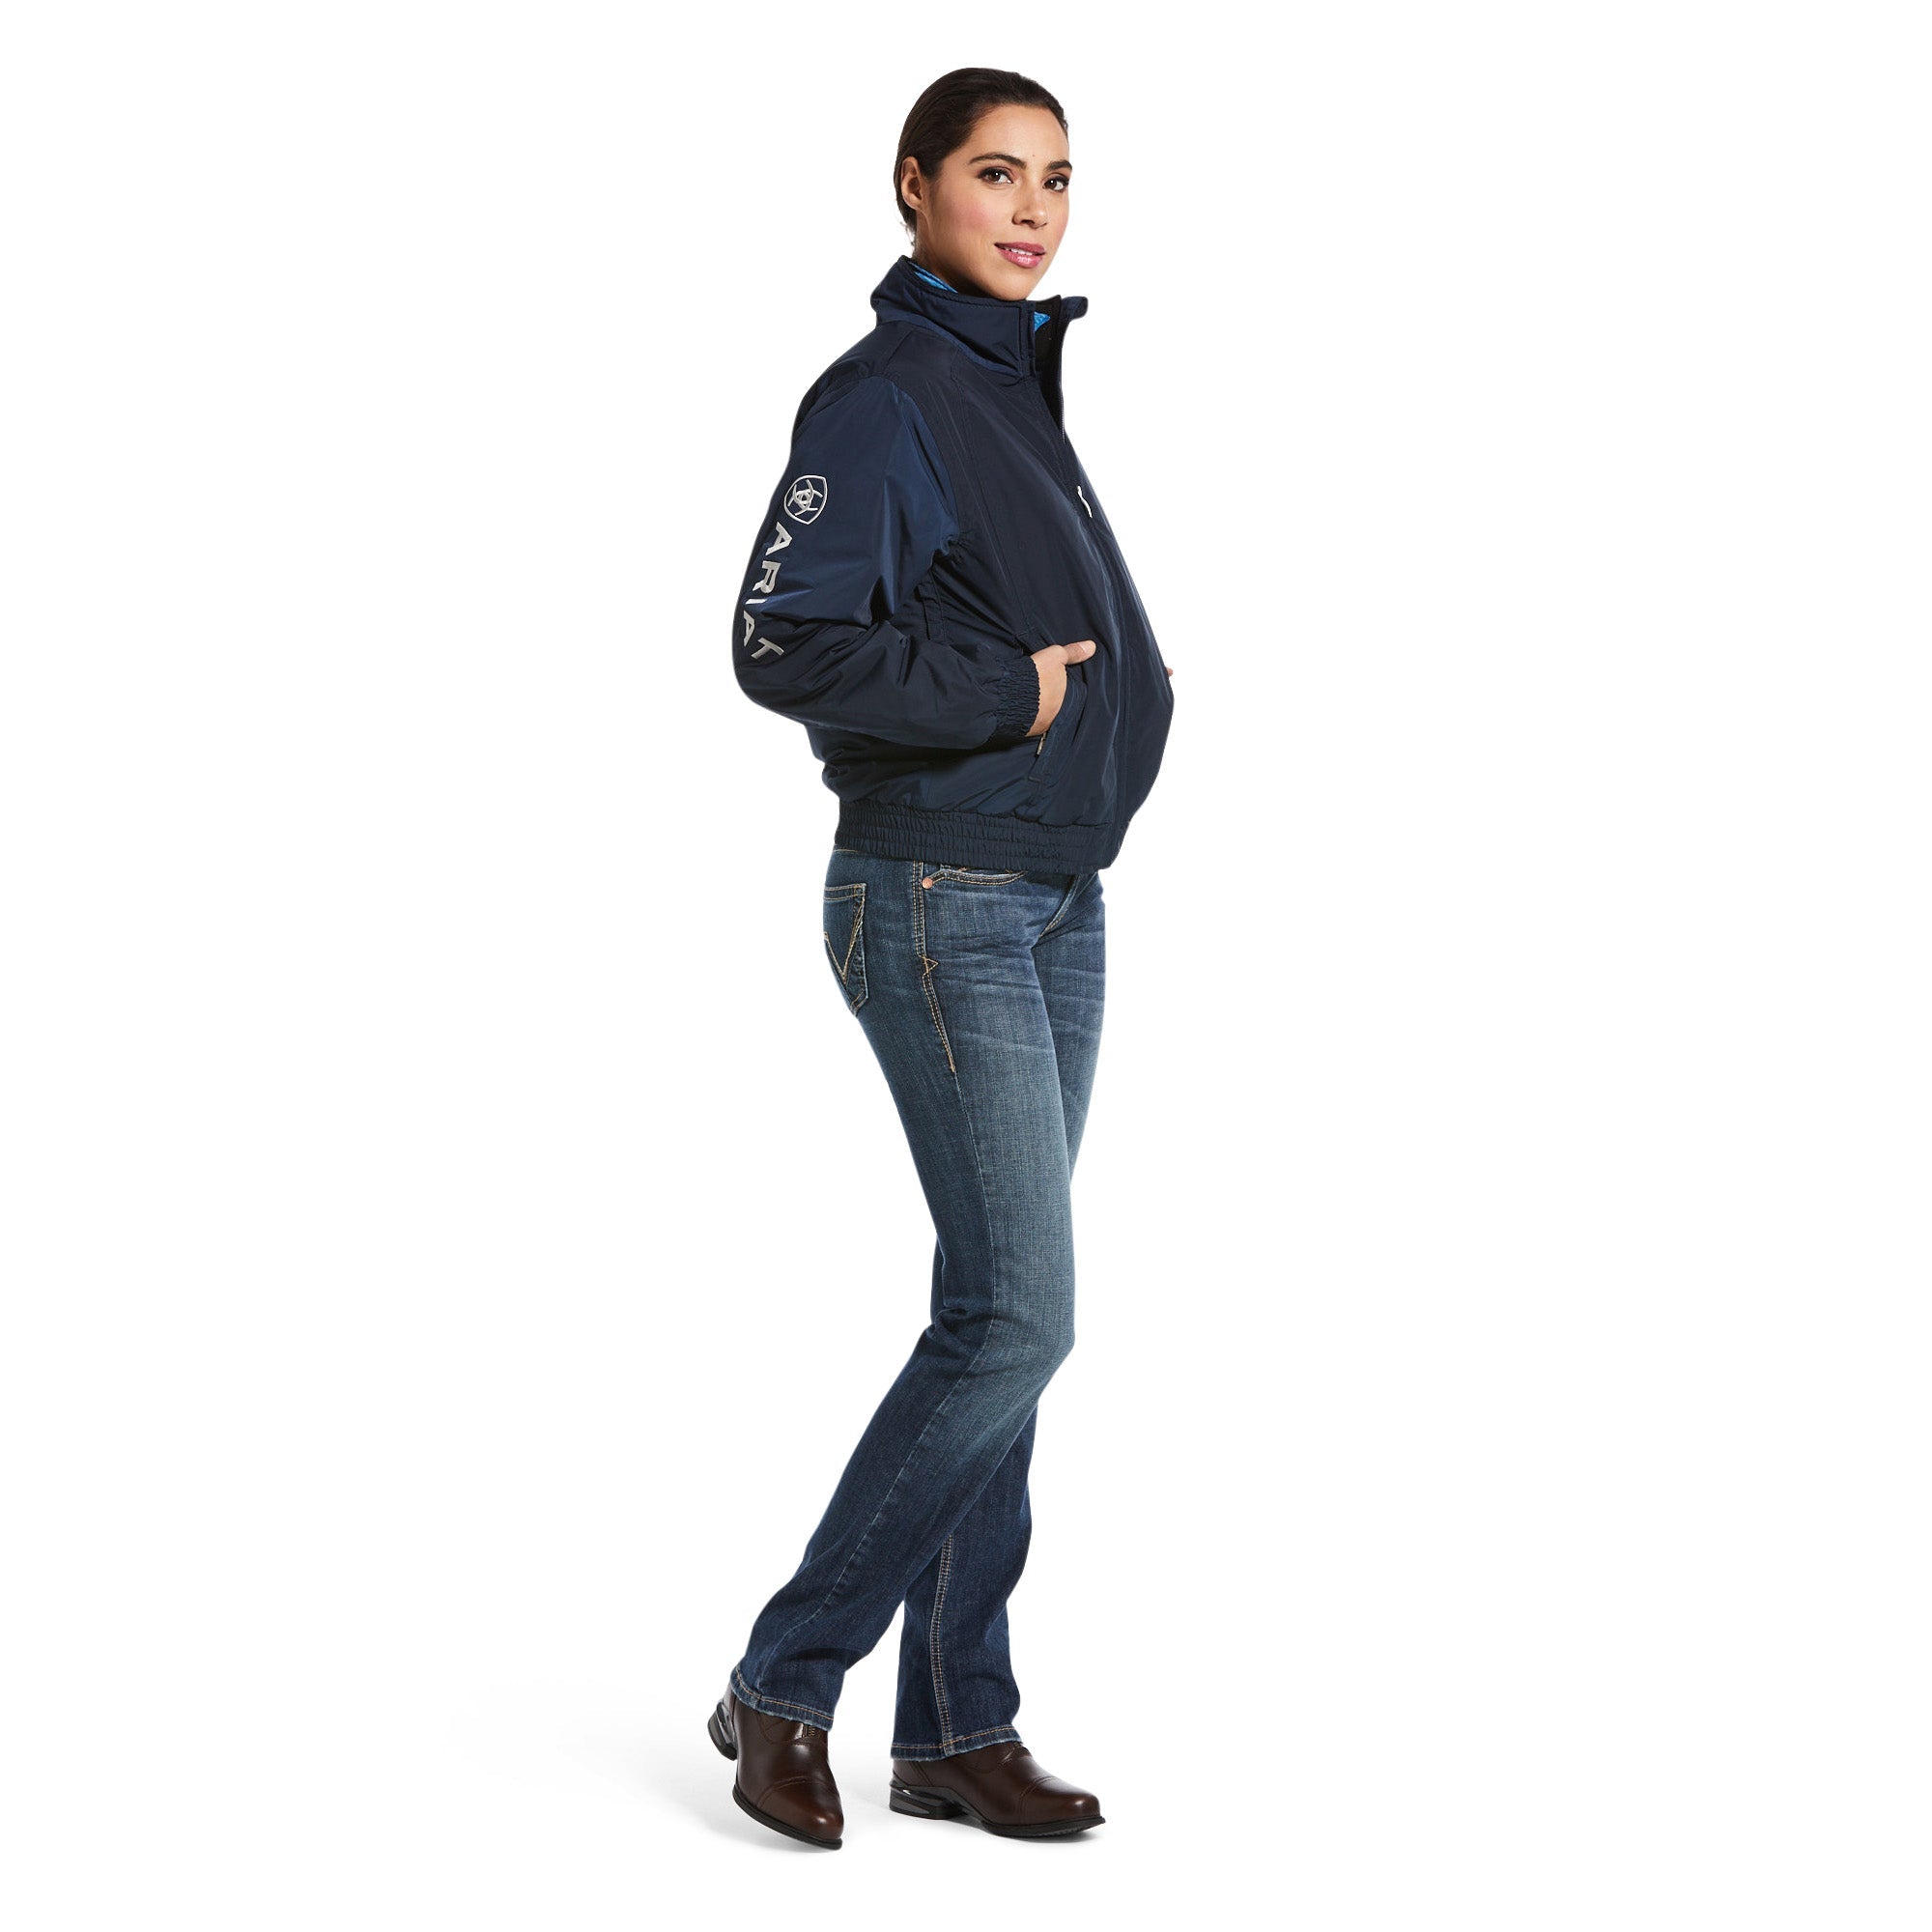 Ariat Womens Stable Team Jacket